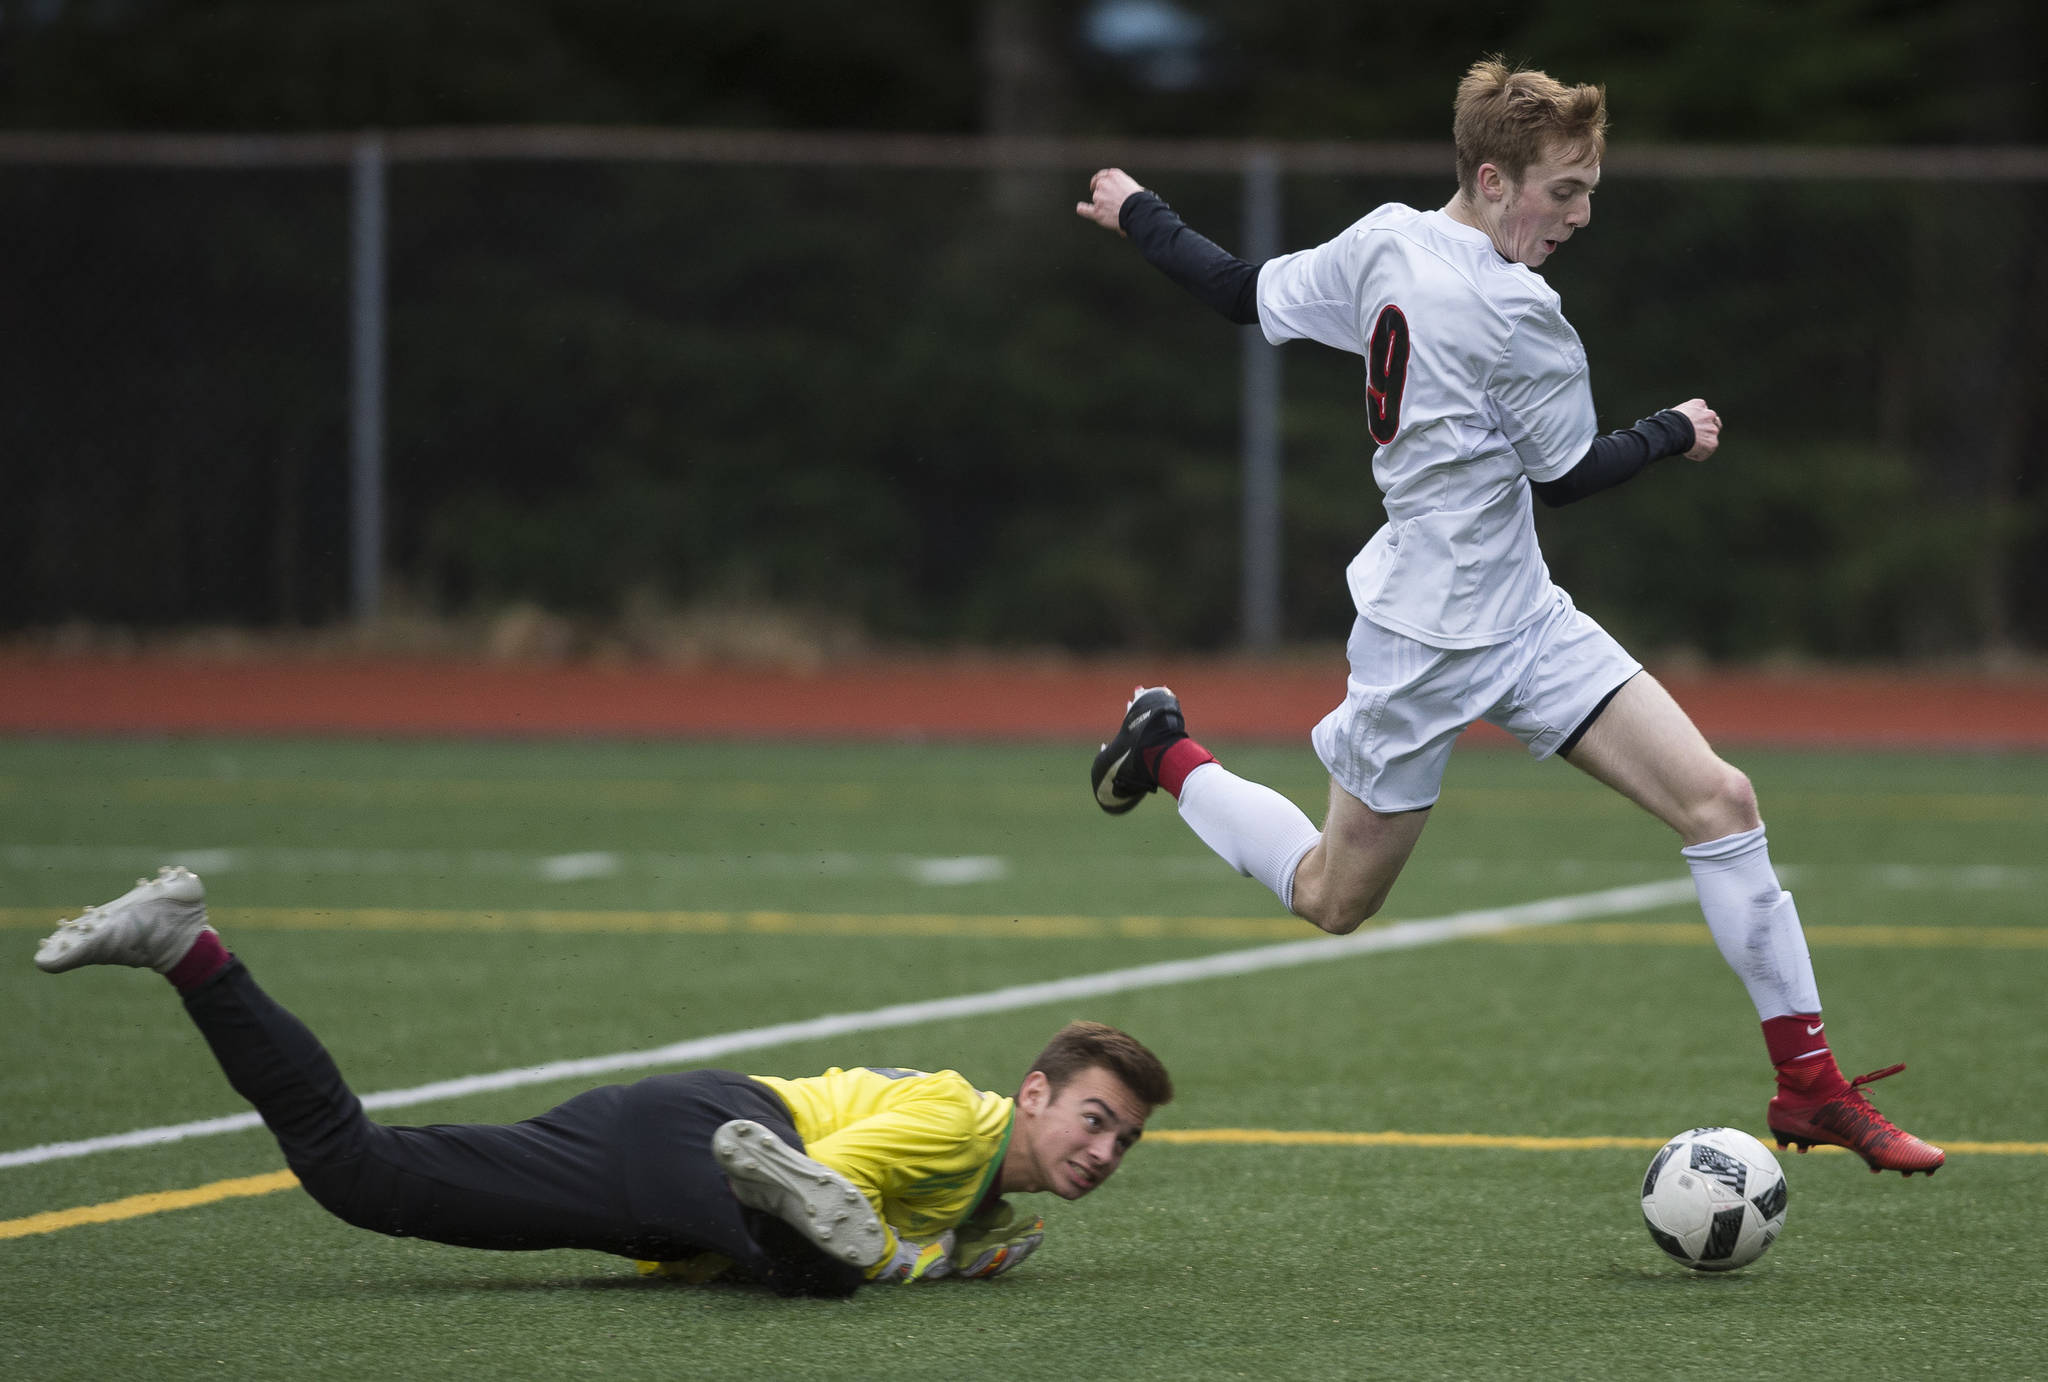 Soccer streak snapped: Kayhi beats JDHS for first time in over a decade